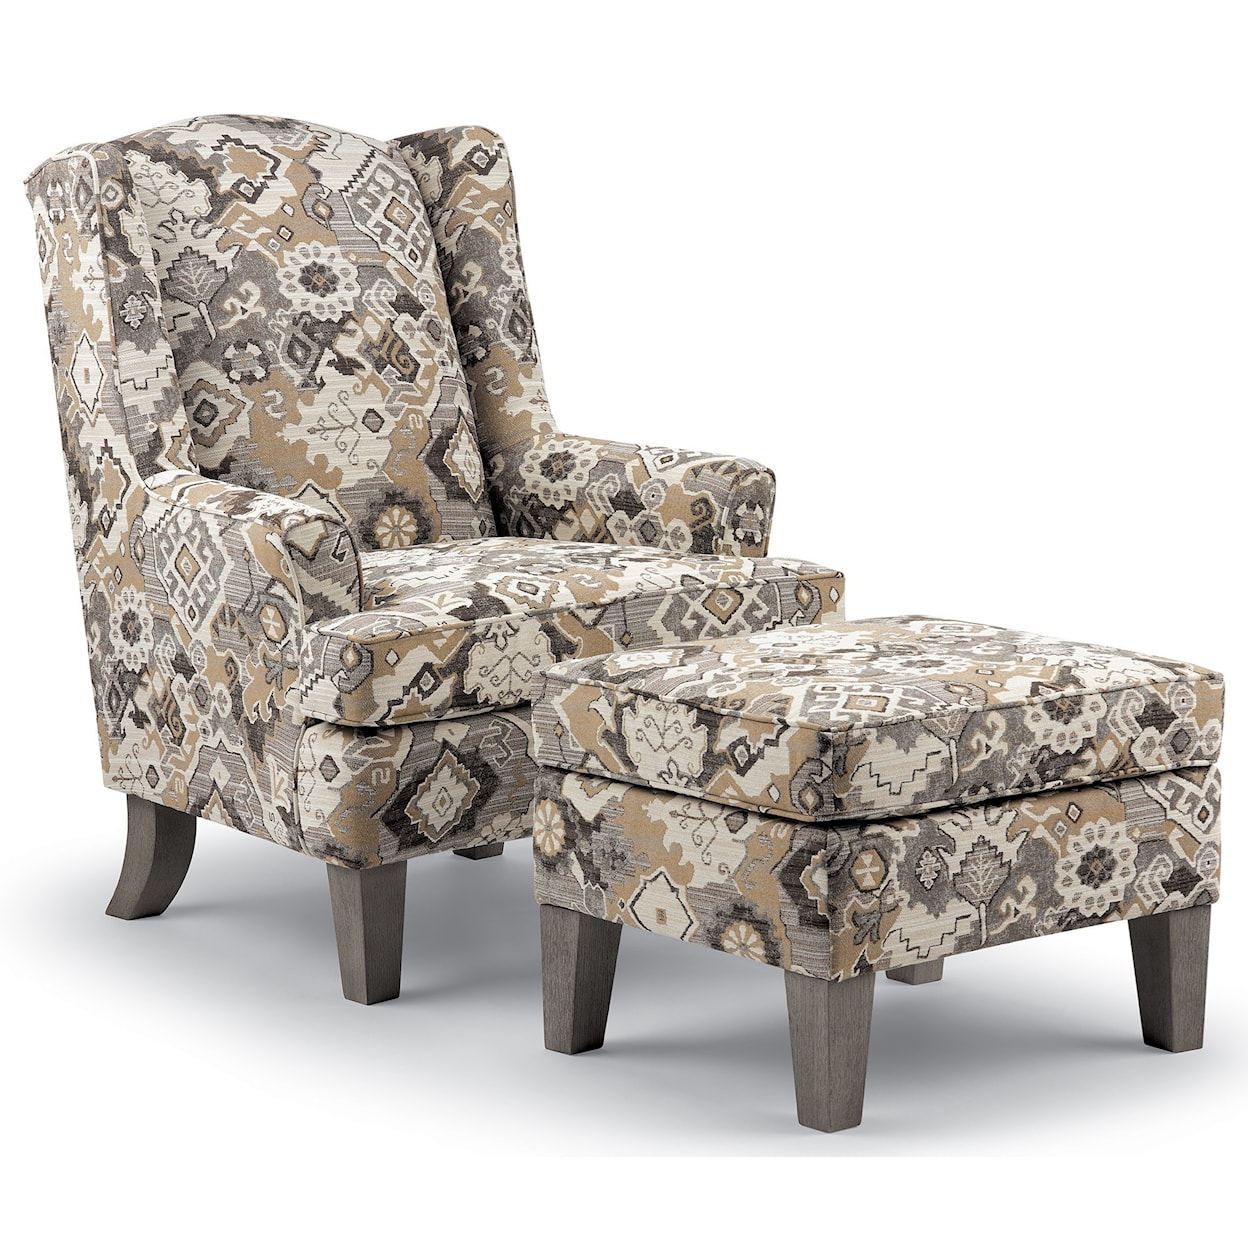 Best Home Furnishings Wing Chairs Andrea Wing Chair